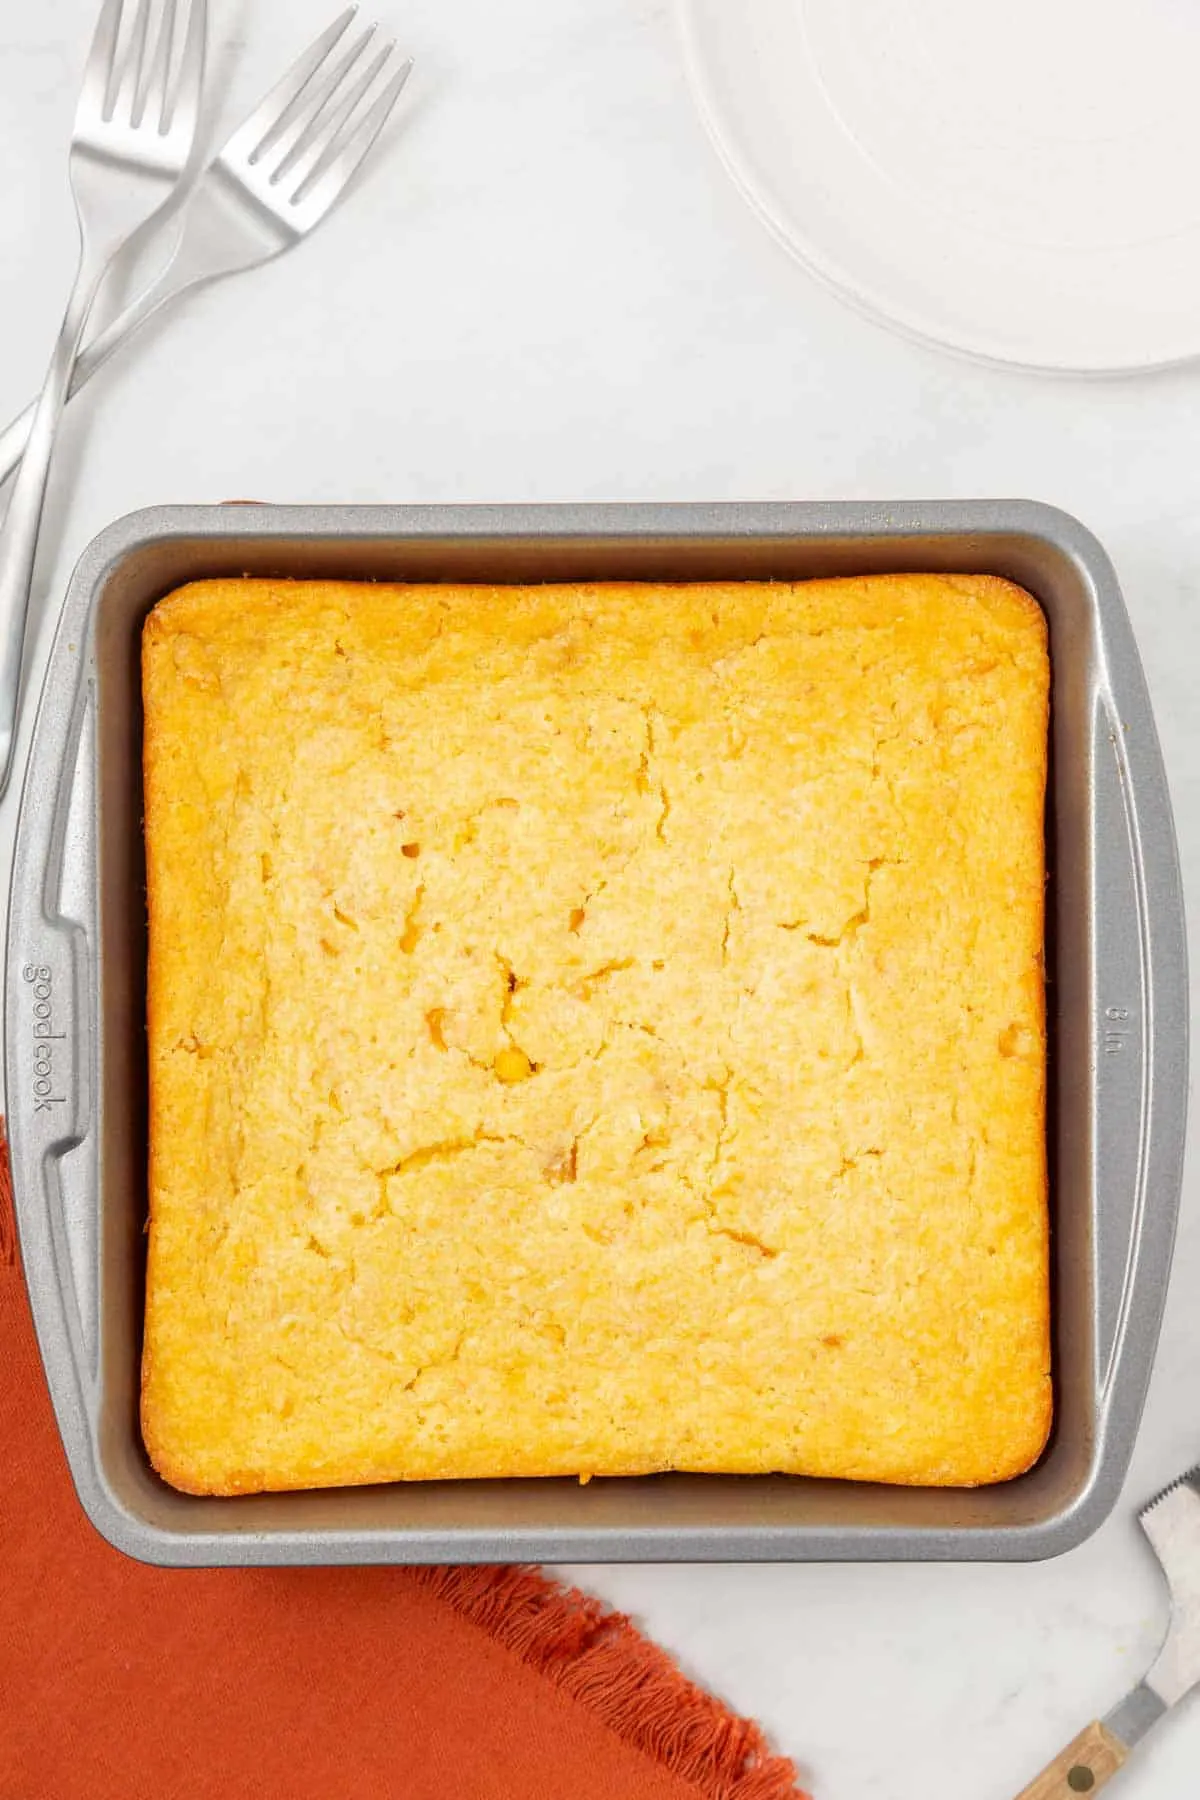 Corn Soufflé is a moist and delicious corn casserole recipe made with canned whole kernel corn, cream corn, sour cream, egg, Jiffy corn muffin mix and melted butter.